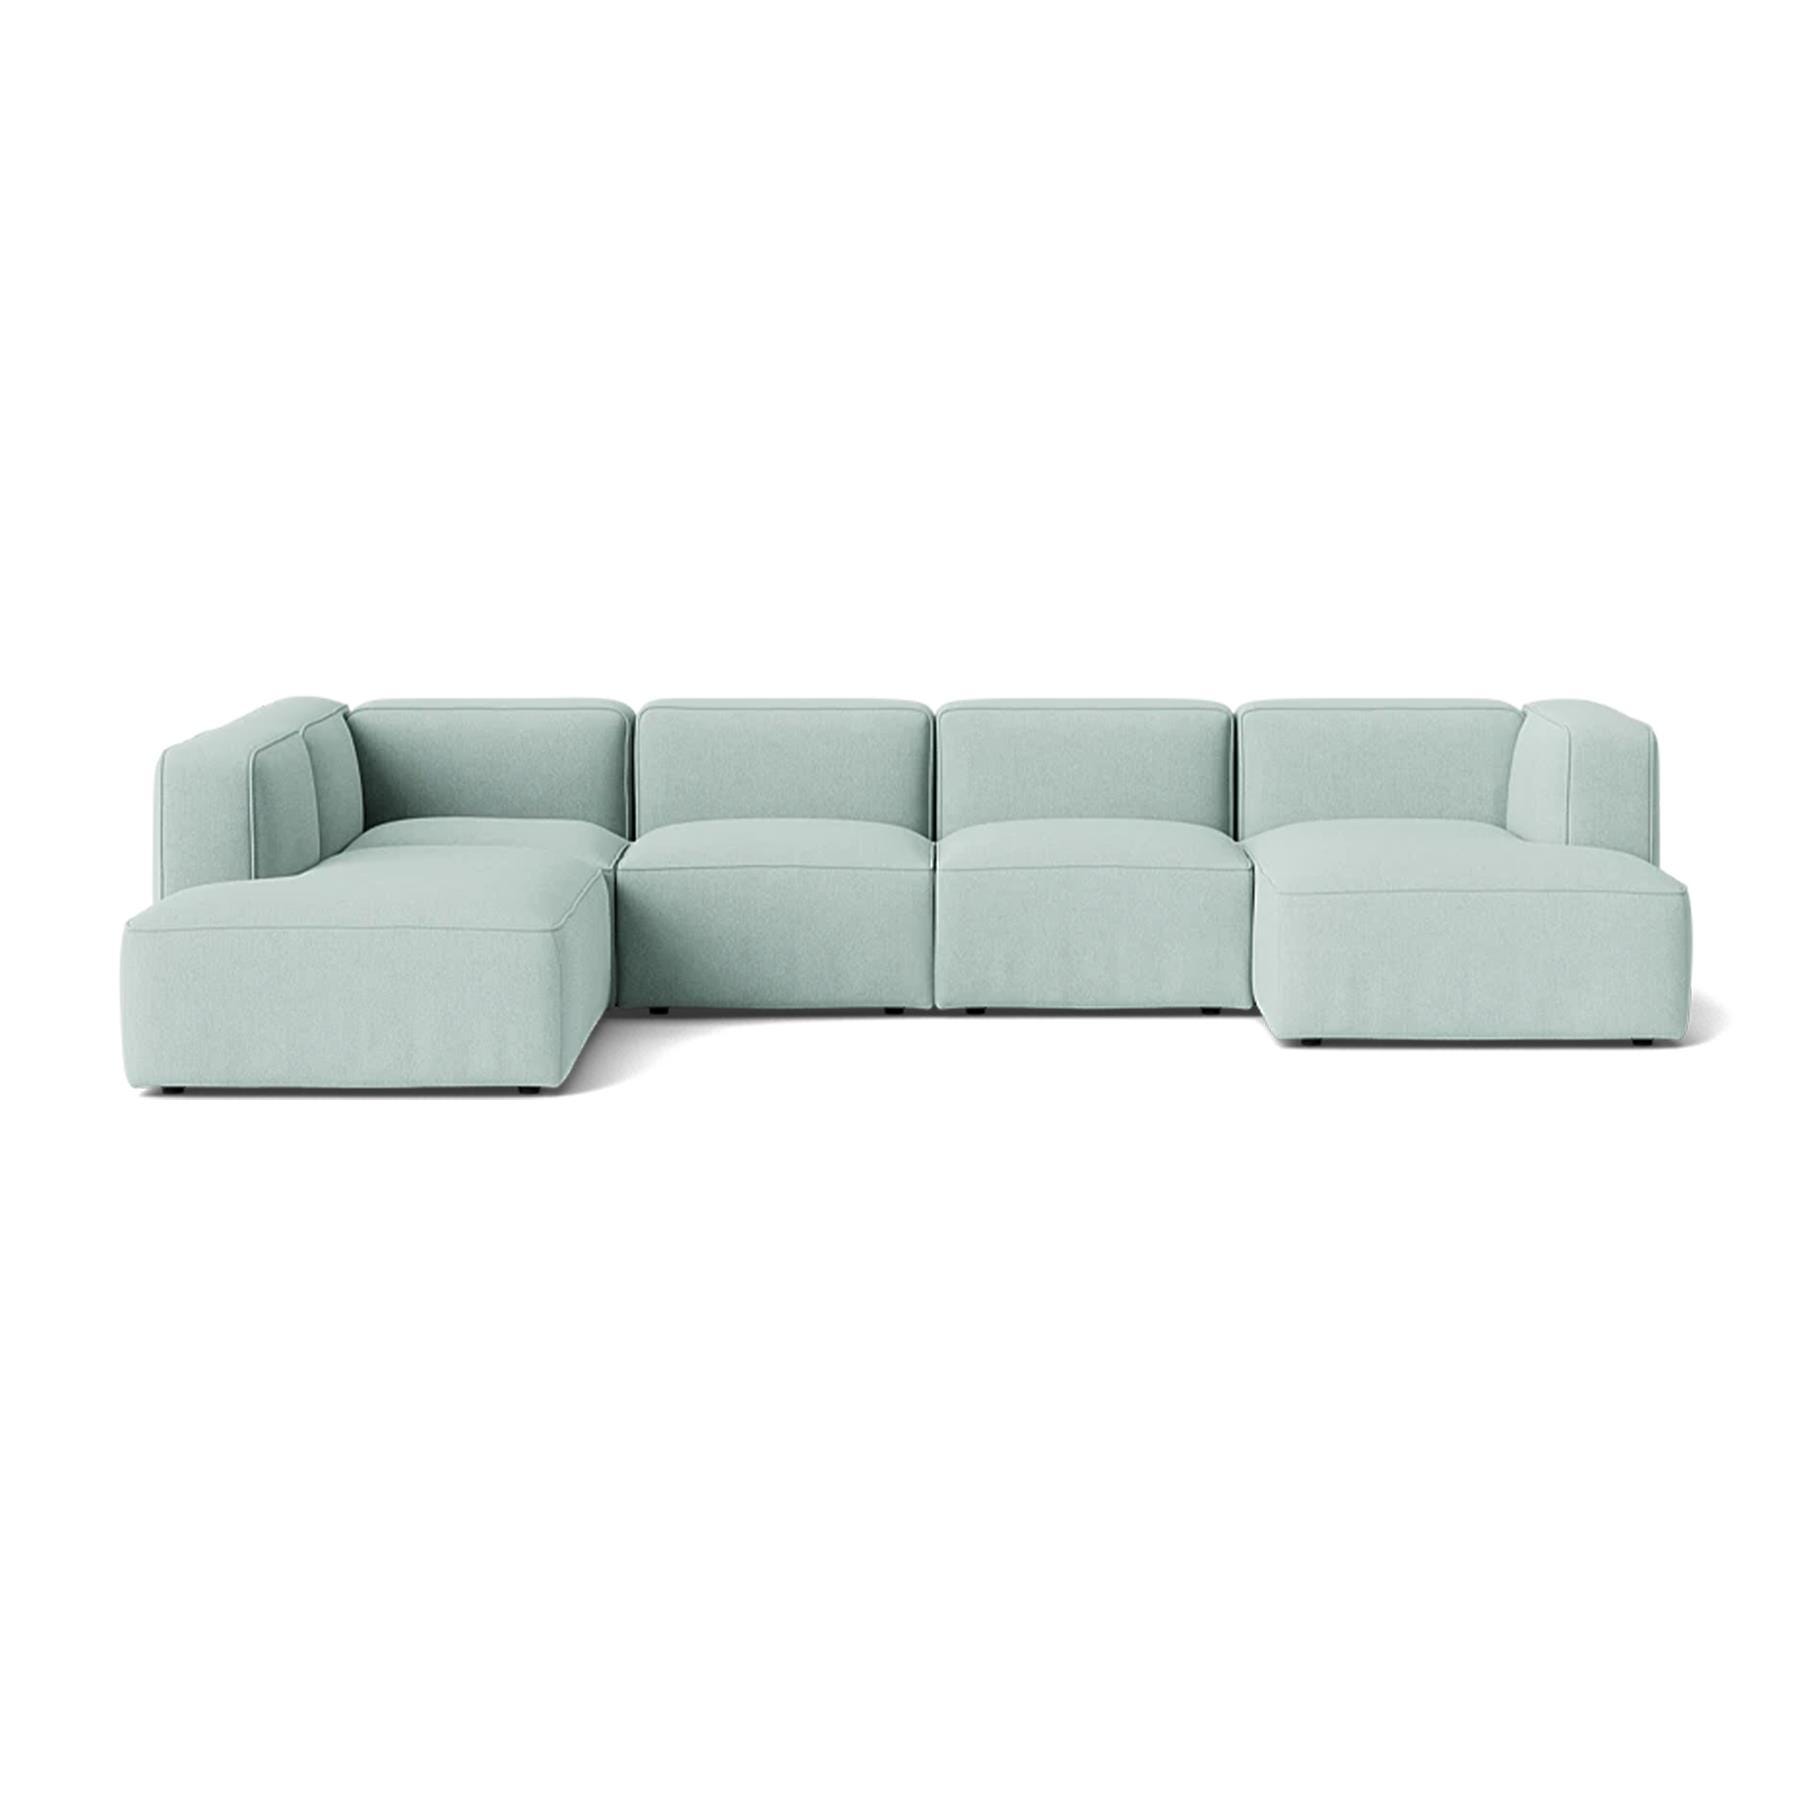 Make Nordic Basecamp Family Sofa Fiord 721 Right Blue Designer Furniture From Holloways Of Ludlow